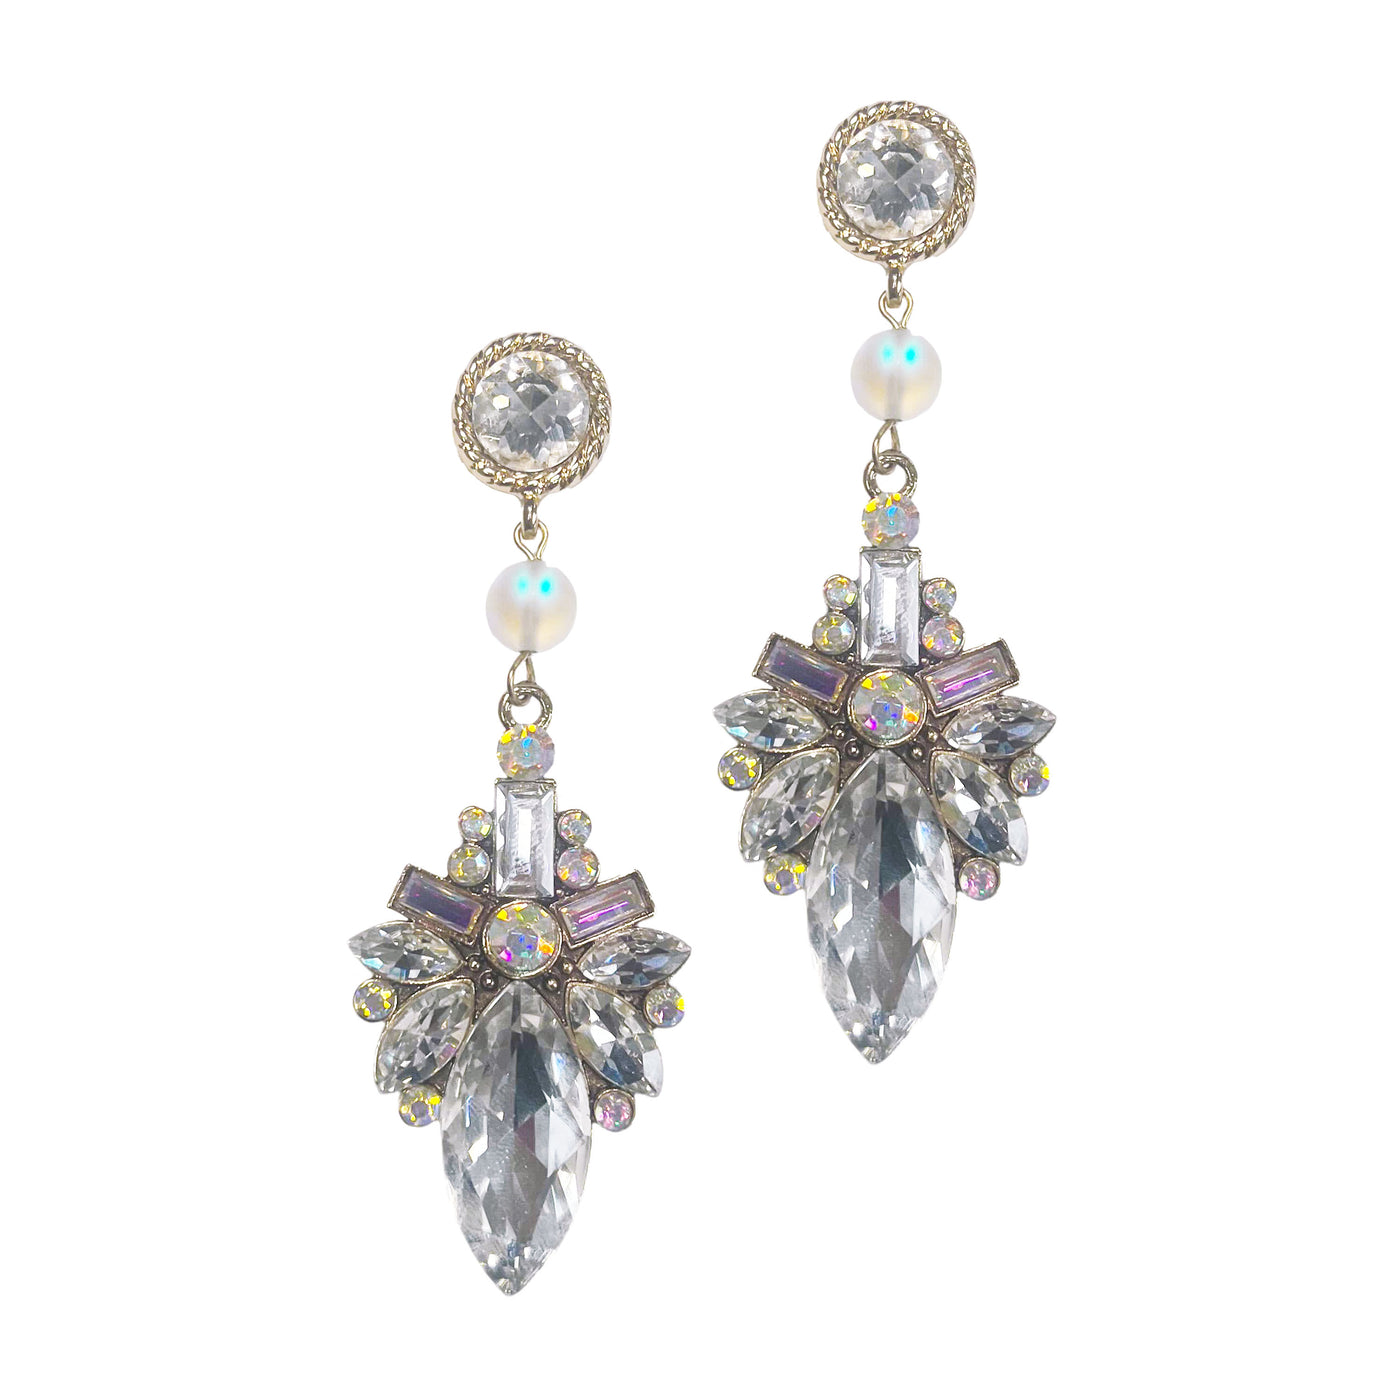 Silver and Crystal Chandelier Earrings